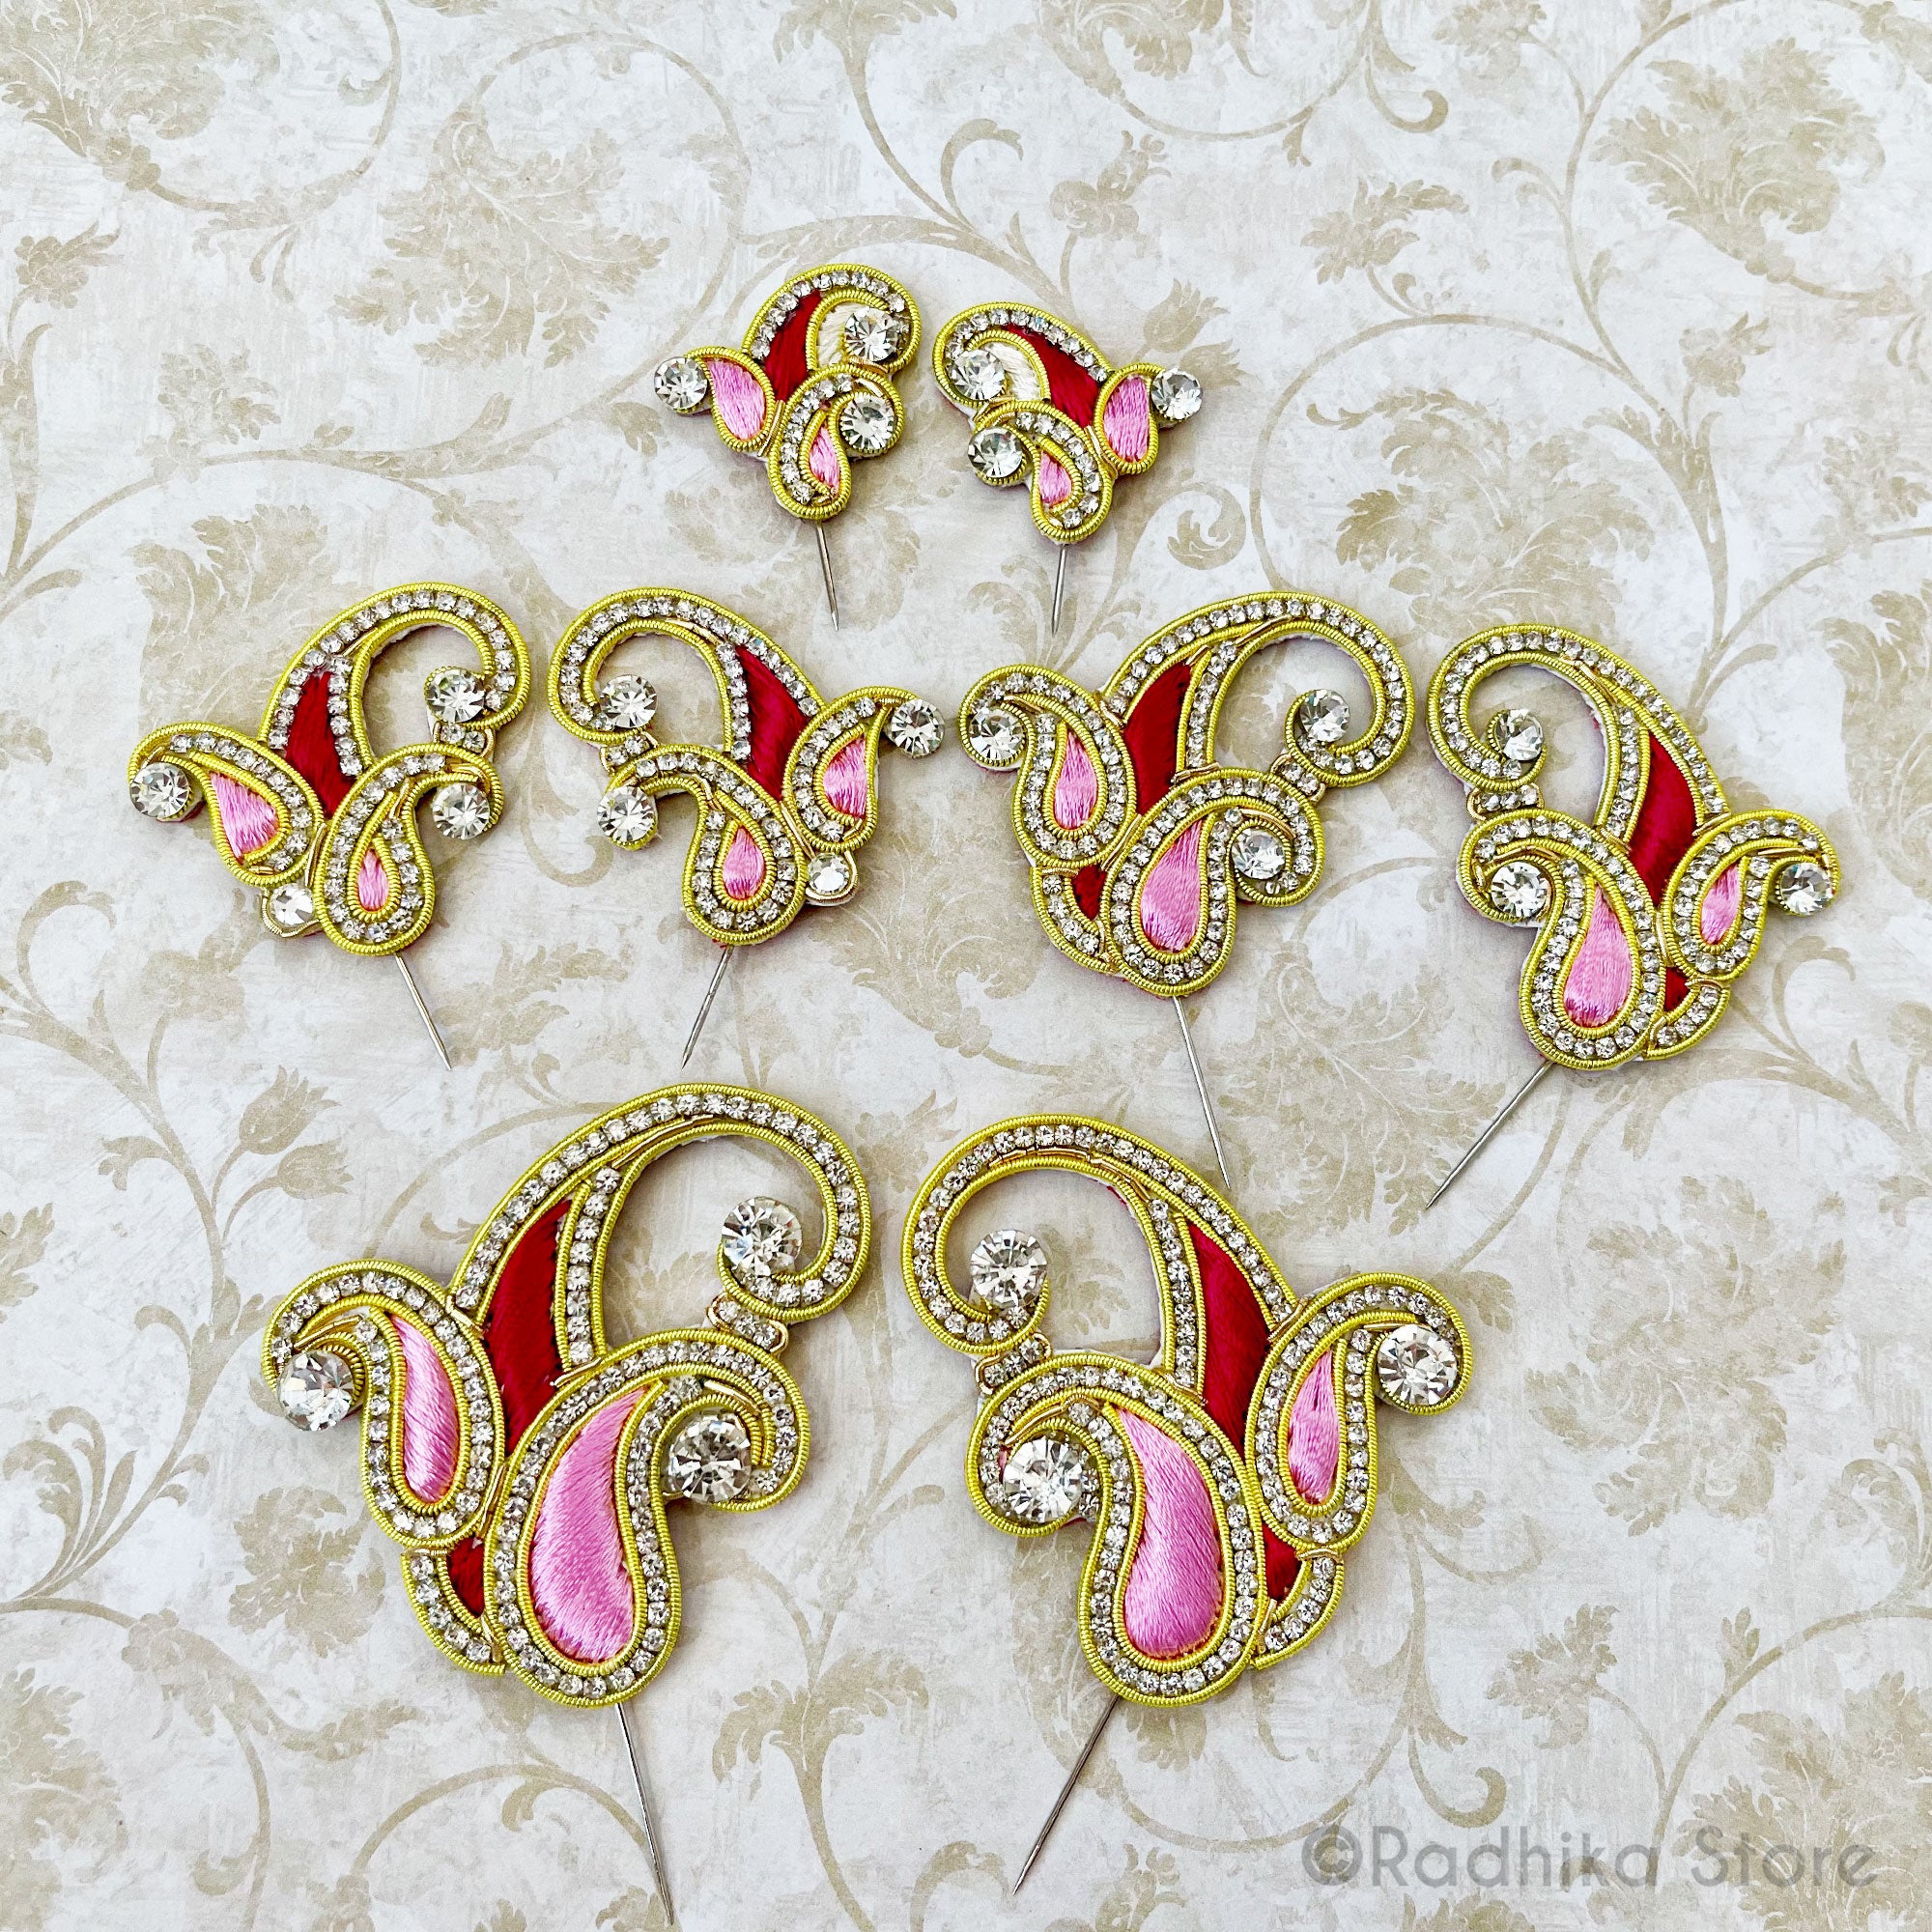 Pink Red with Gold Embroidery Turban Pins - Vrindavan Chandrikas - Set of 2